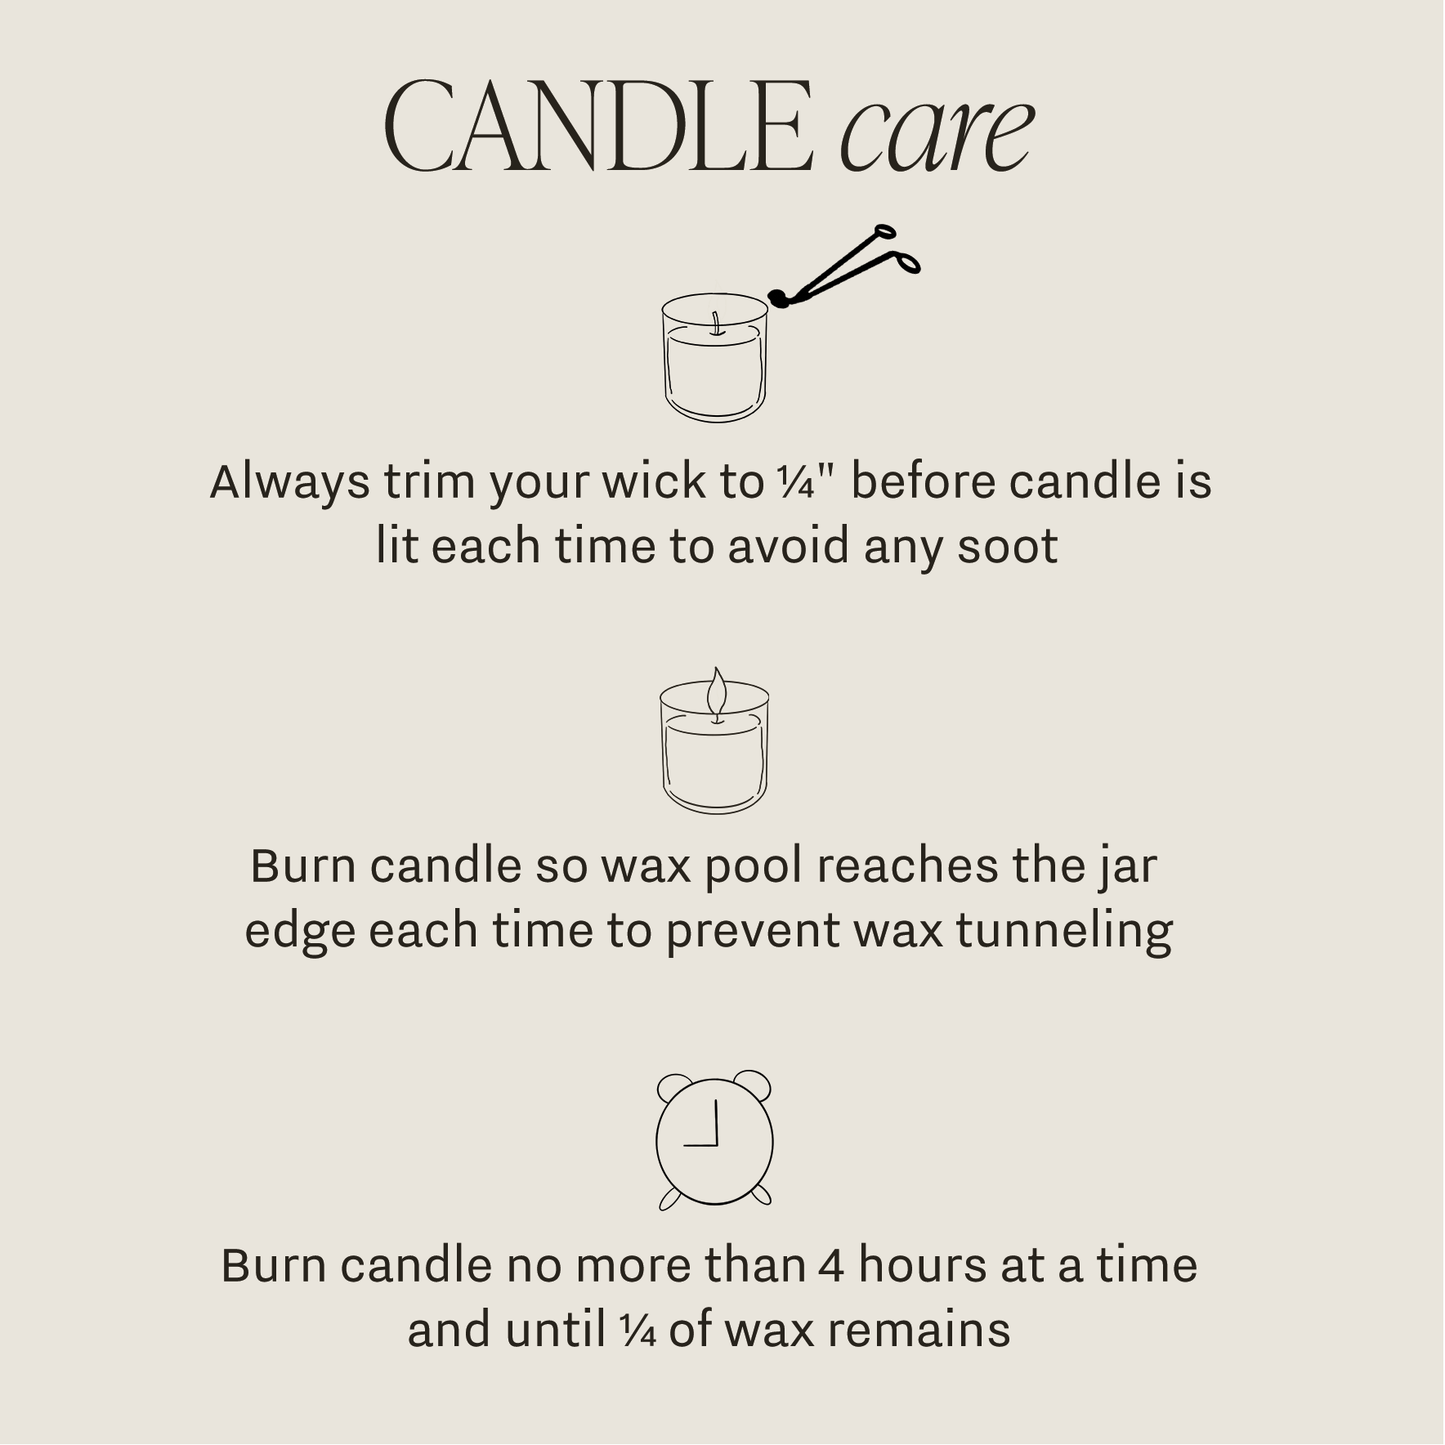 Candy Cane and Cocoa Candle